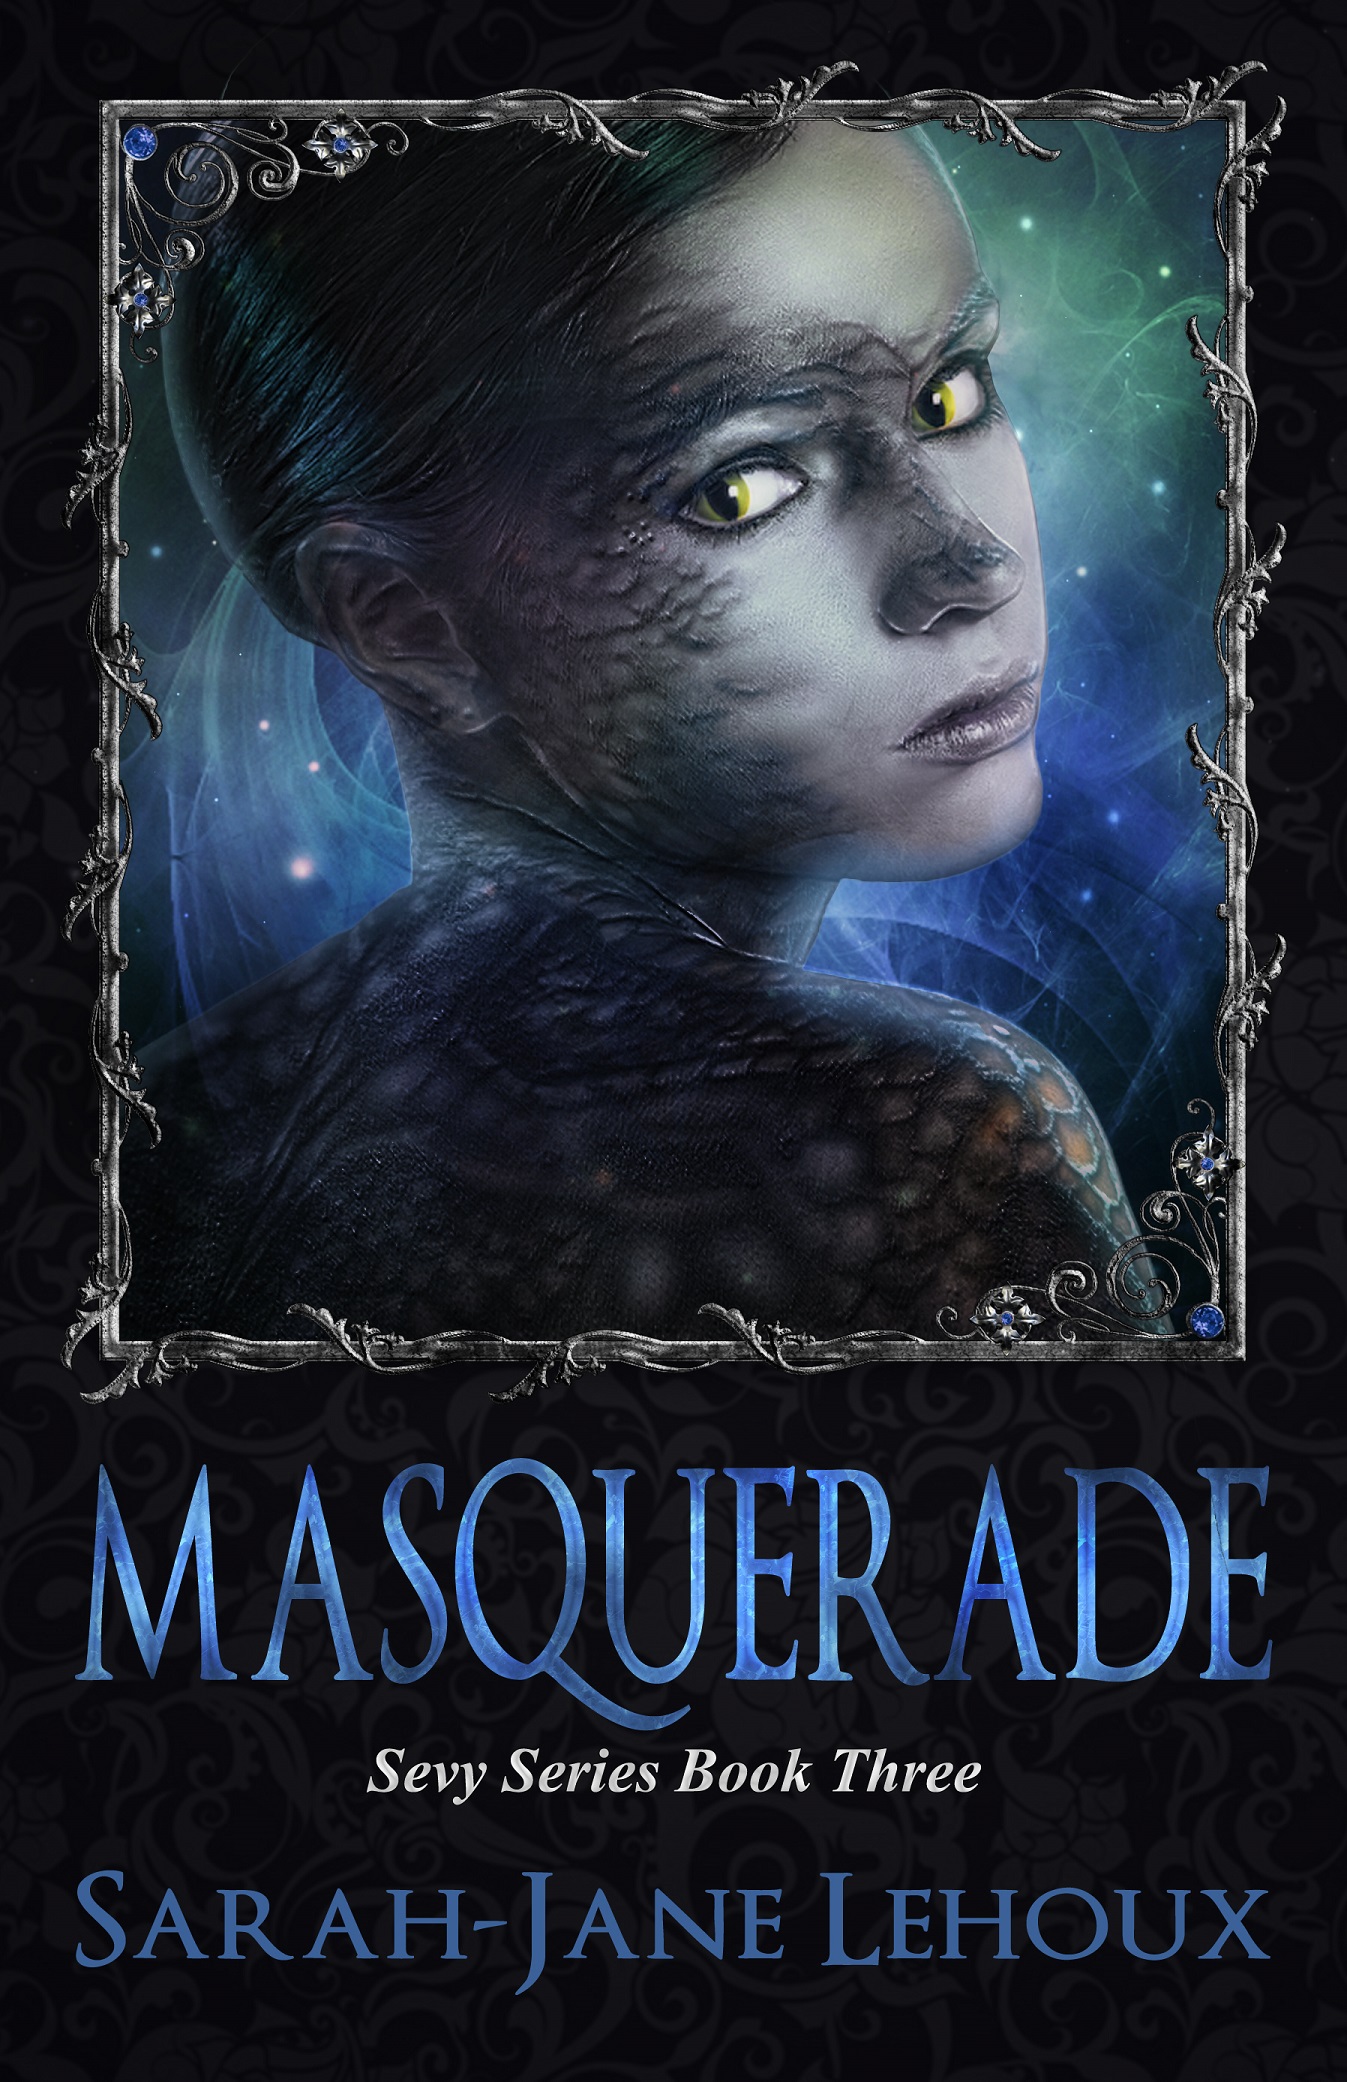 Lahoux masqueradecover